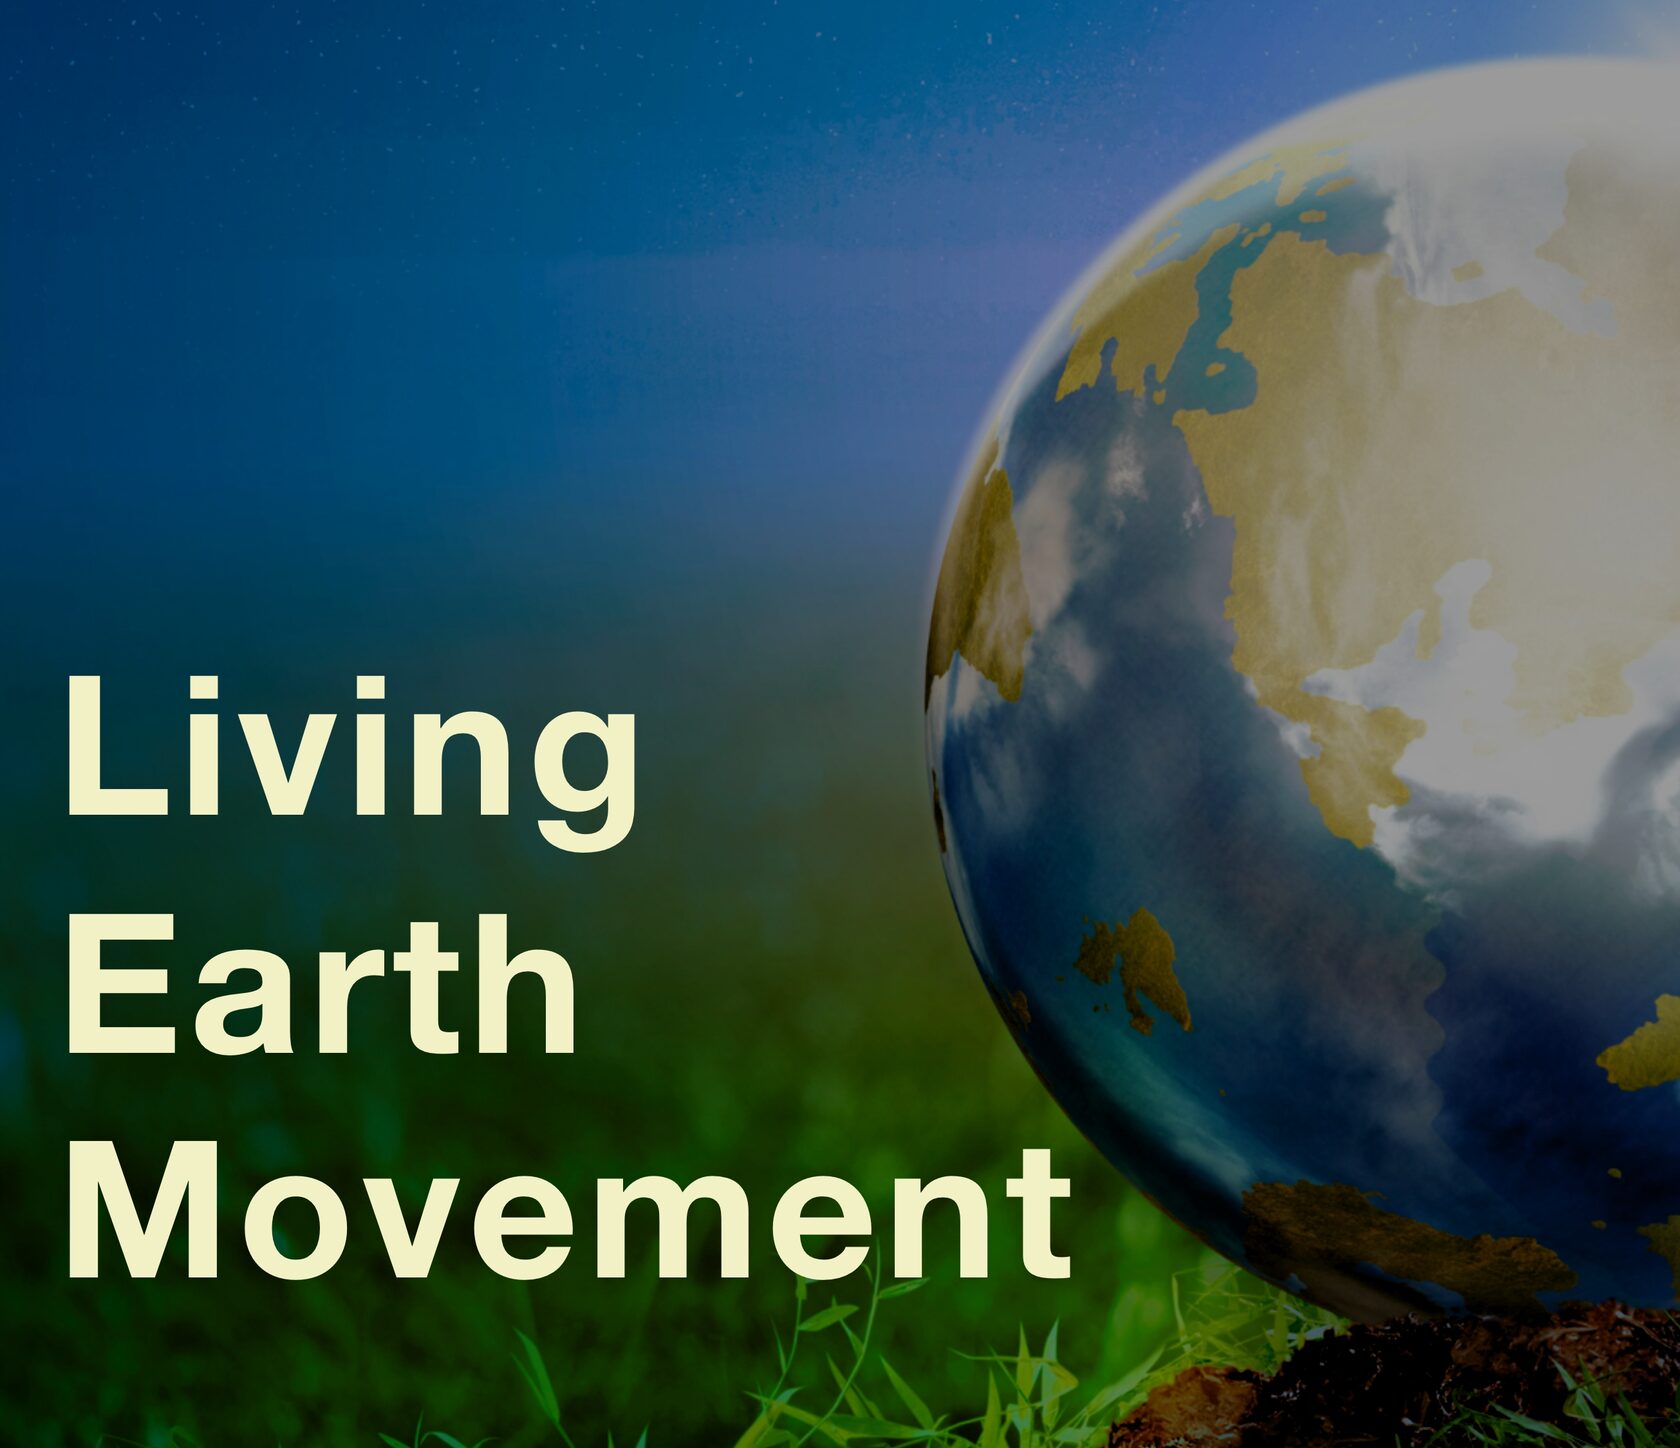 The Living Earth Movement